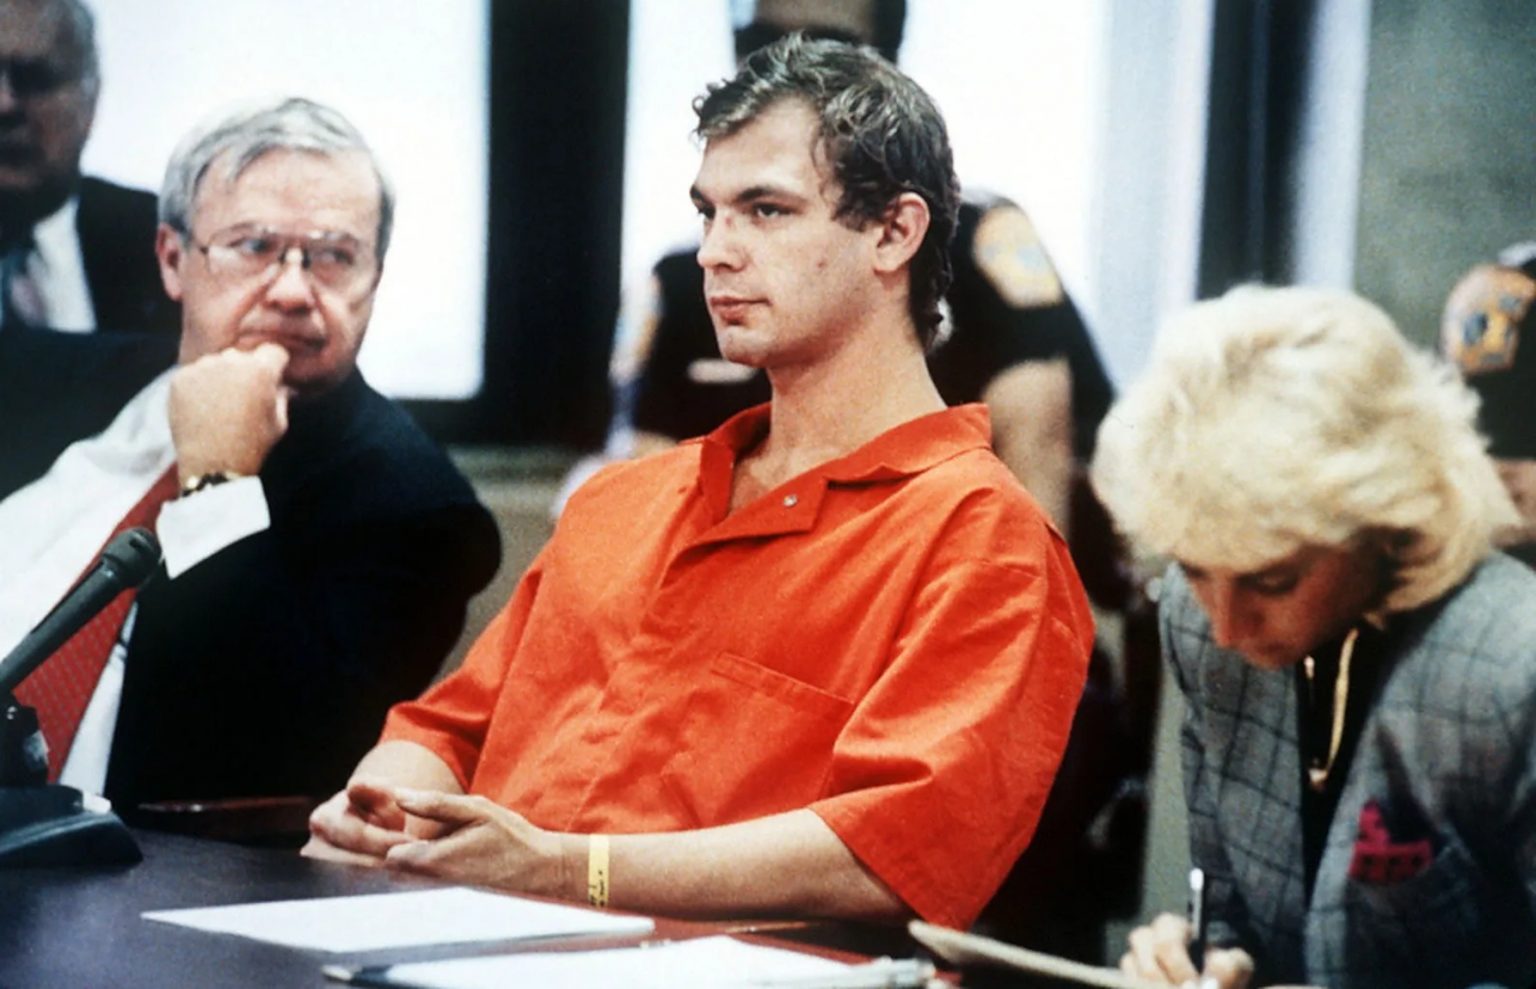 18 Jeffrey Dahmer Facts About The Notorious Serial Killer